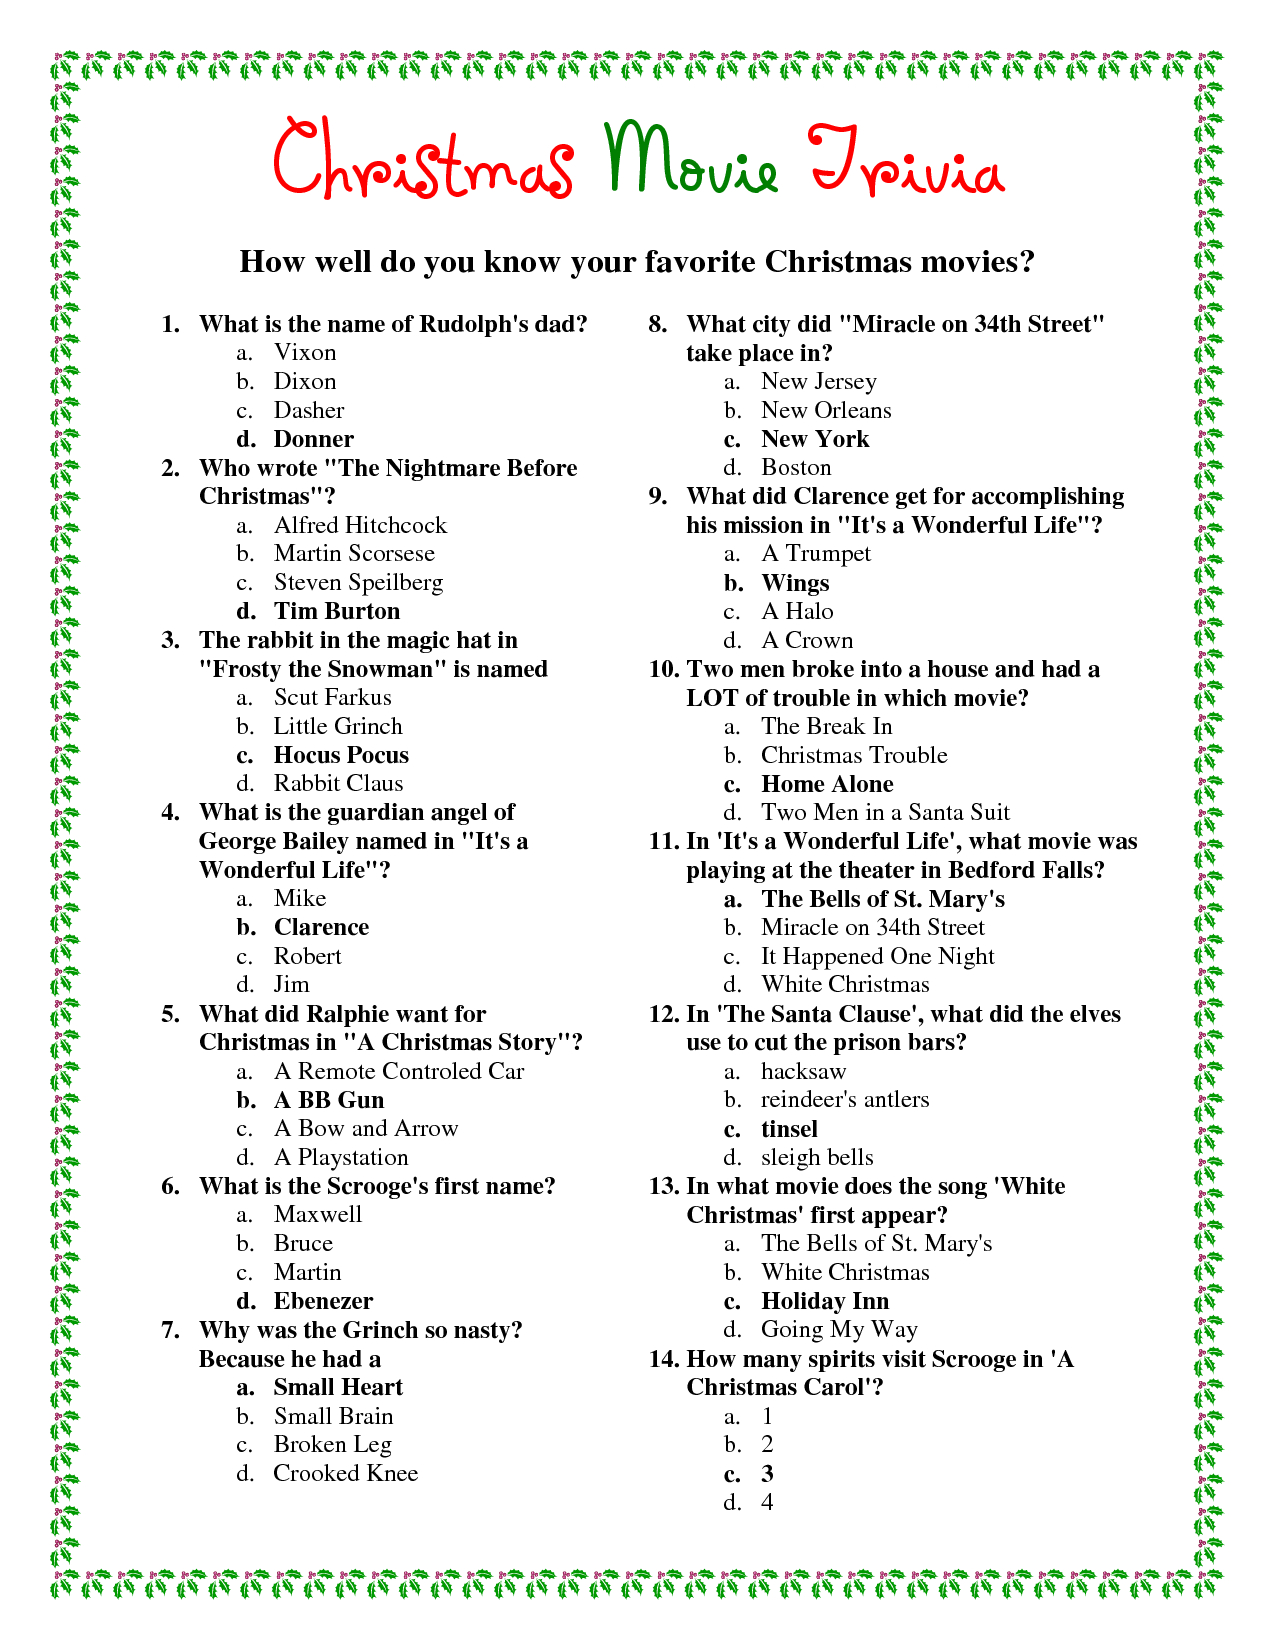 Ideas Collection Easy Christmas Trivia Questions And Answers - Free Bible Questions And Answers Printable